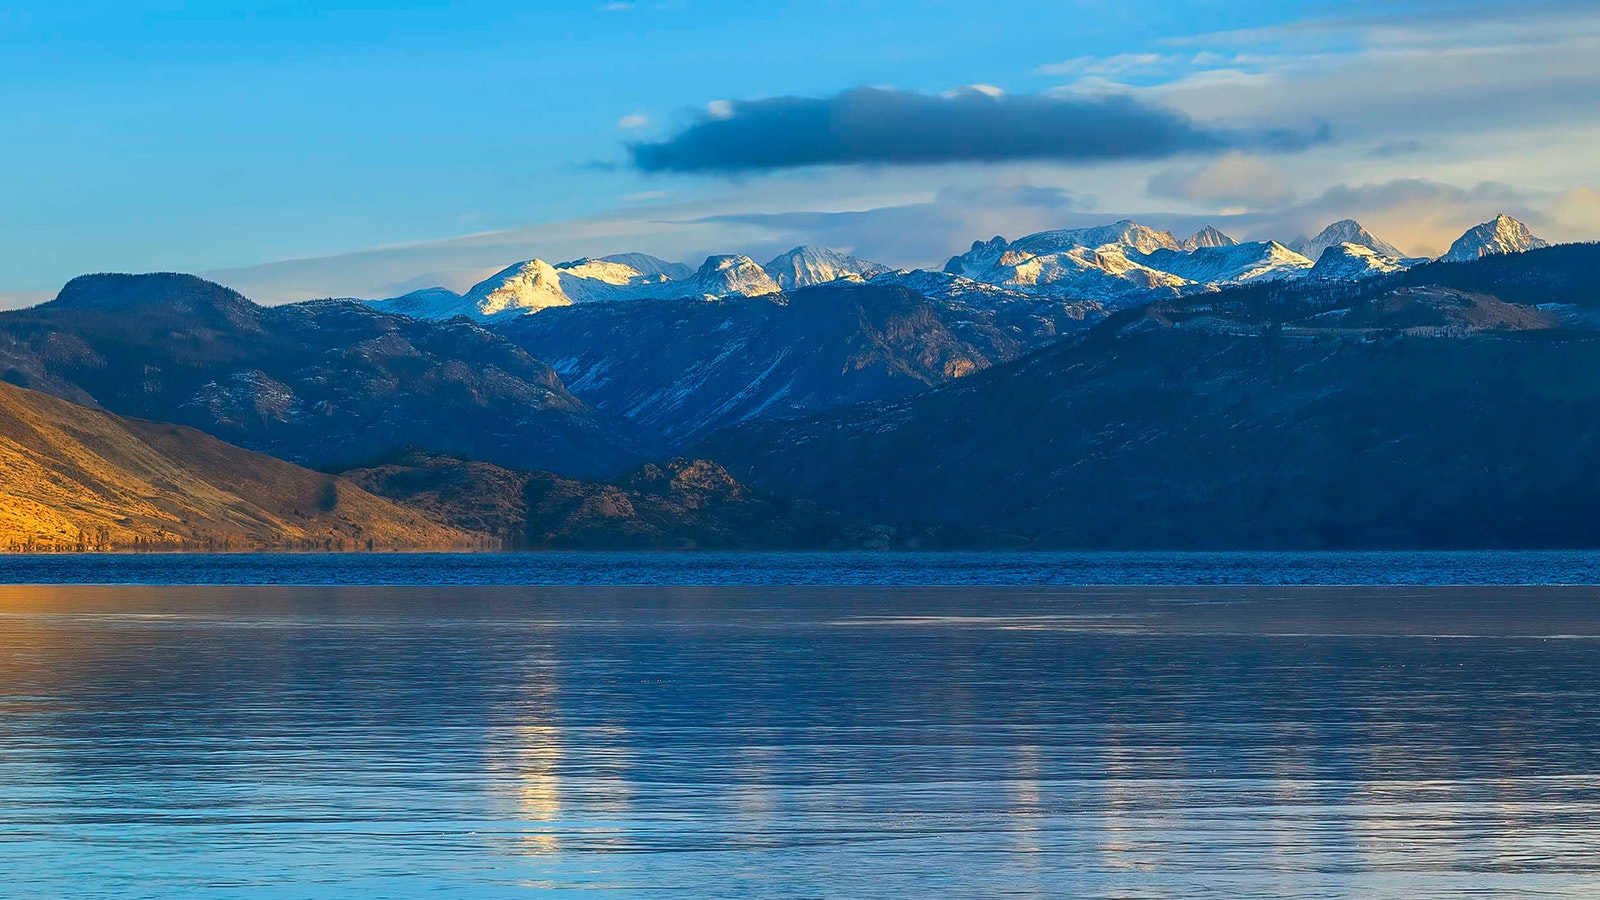 Fremont Lake looks serene, but a blast of Wyoming wind can turn it into a natural symphony.